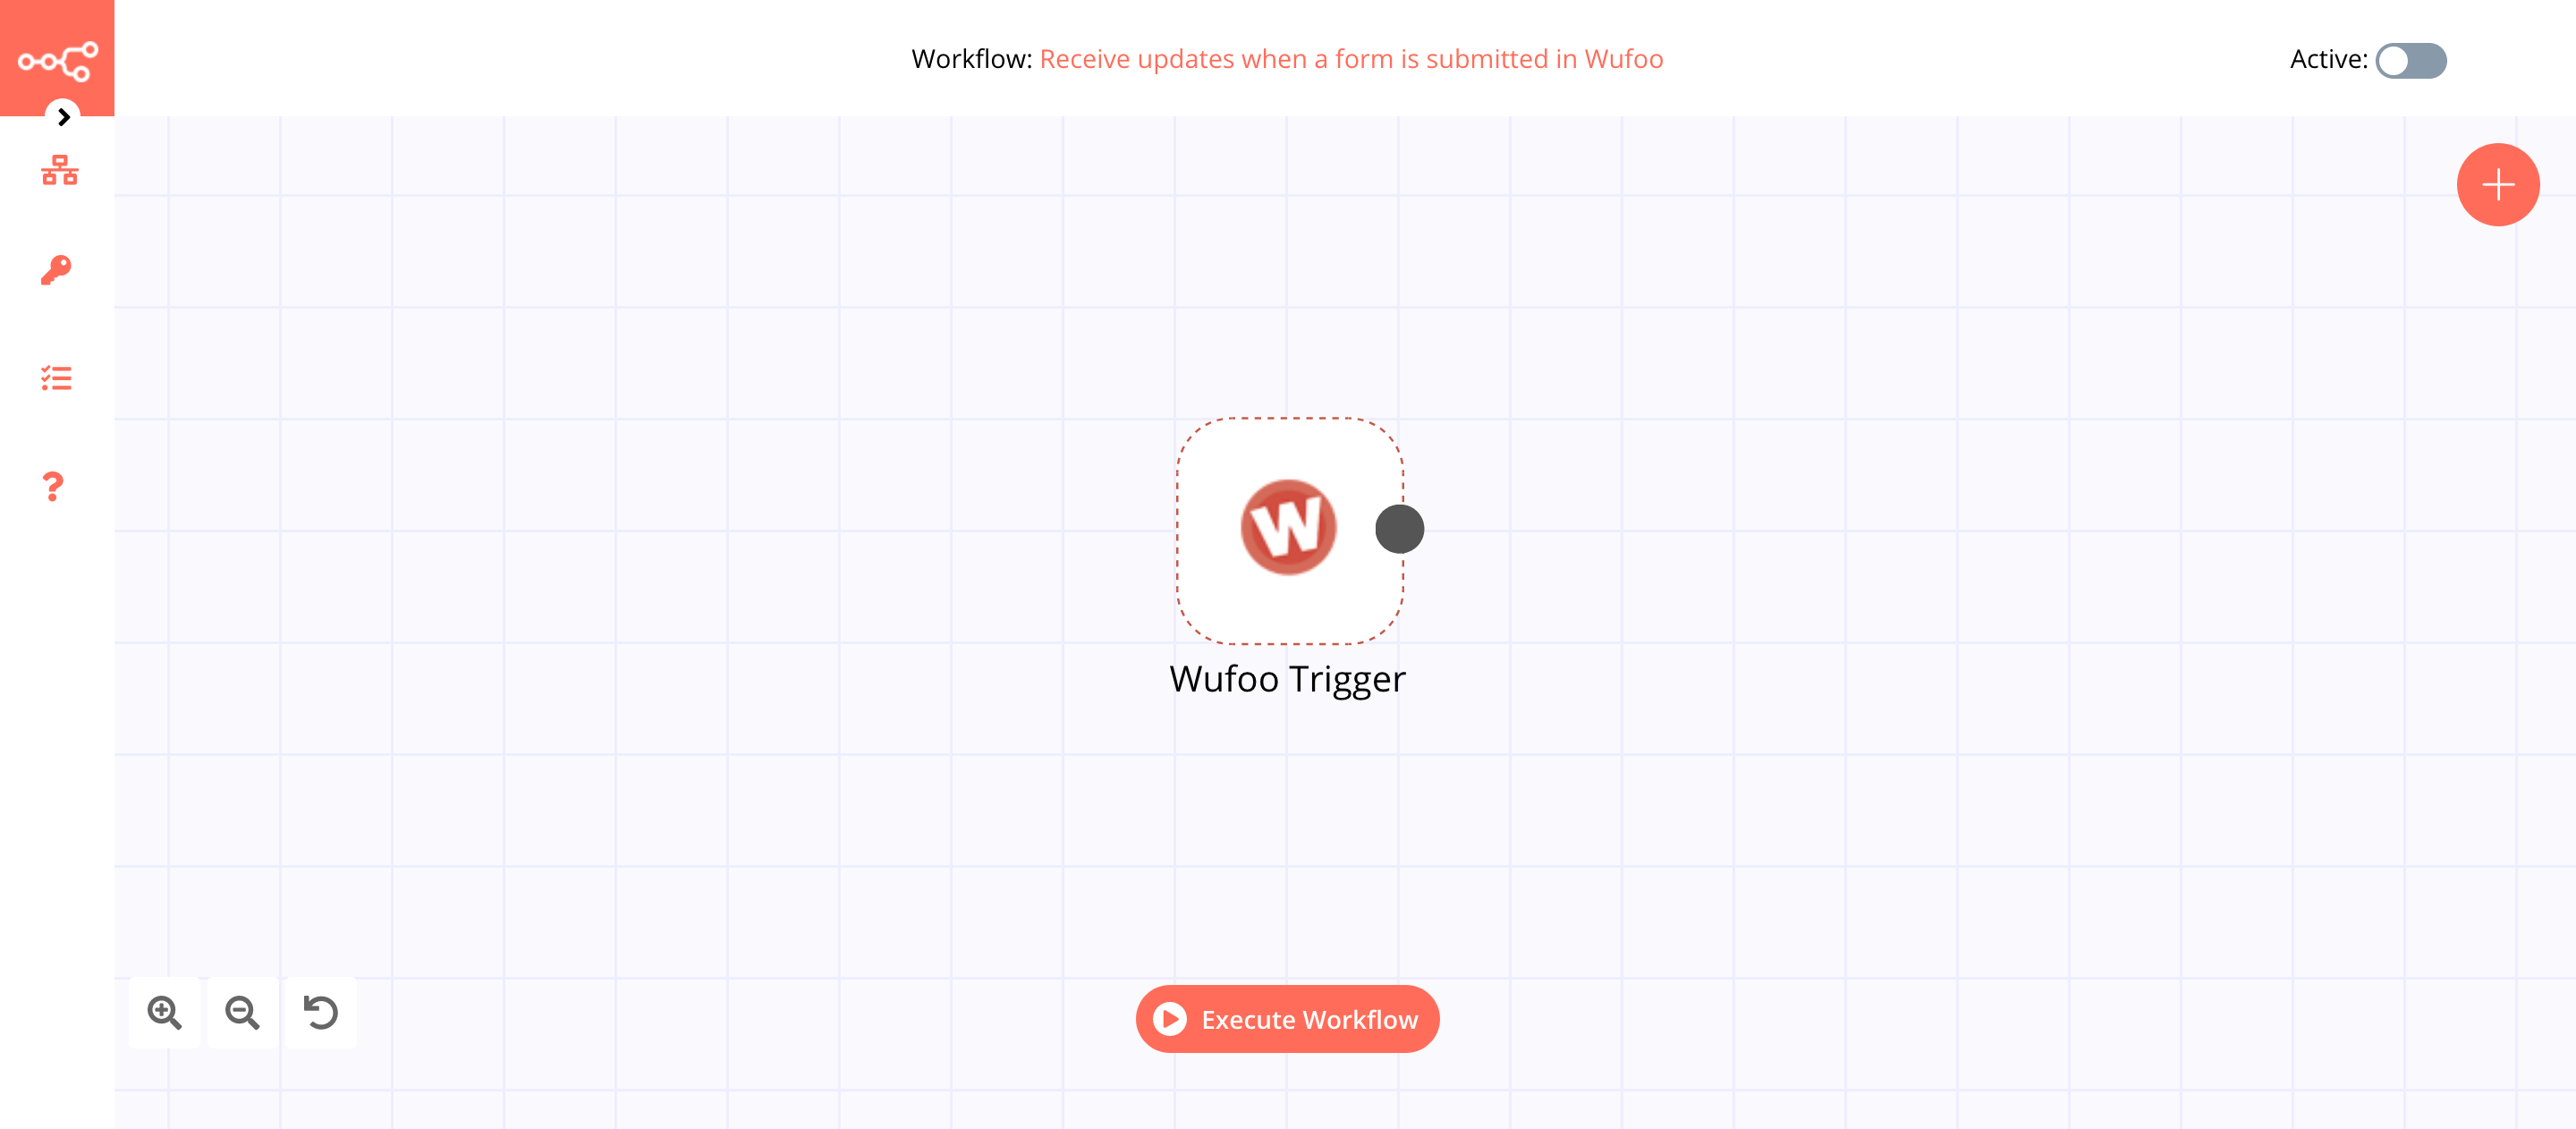 A workflow with the Wufoo Trigger node